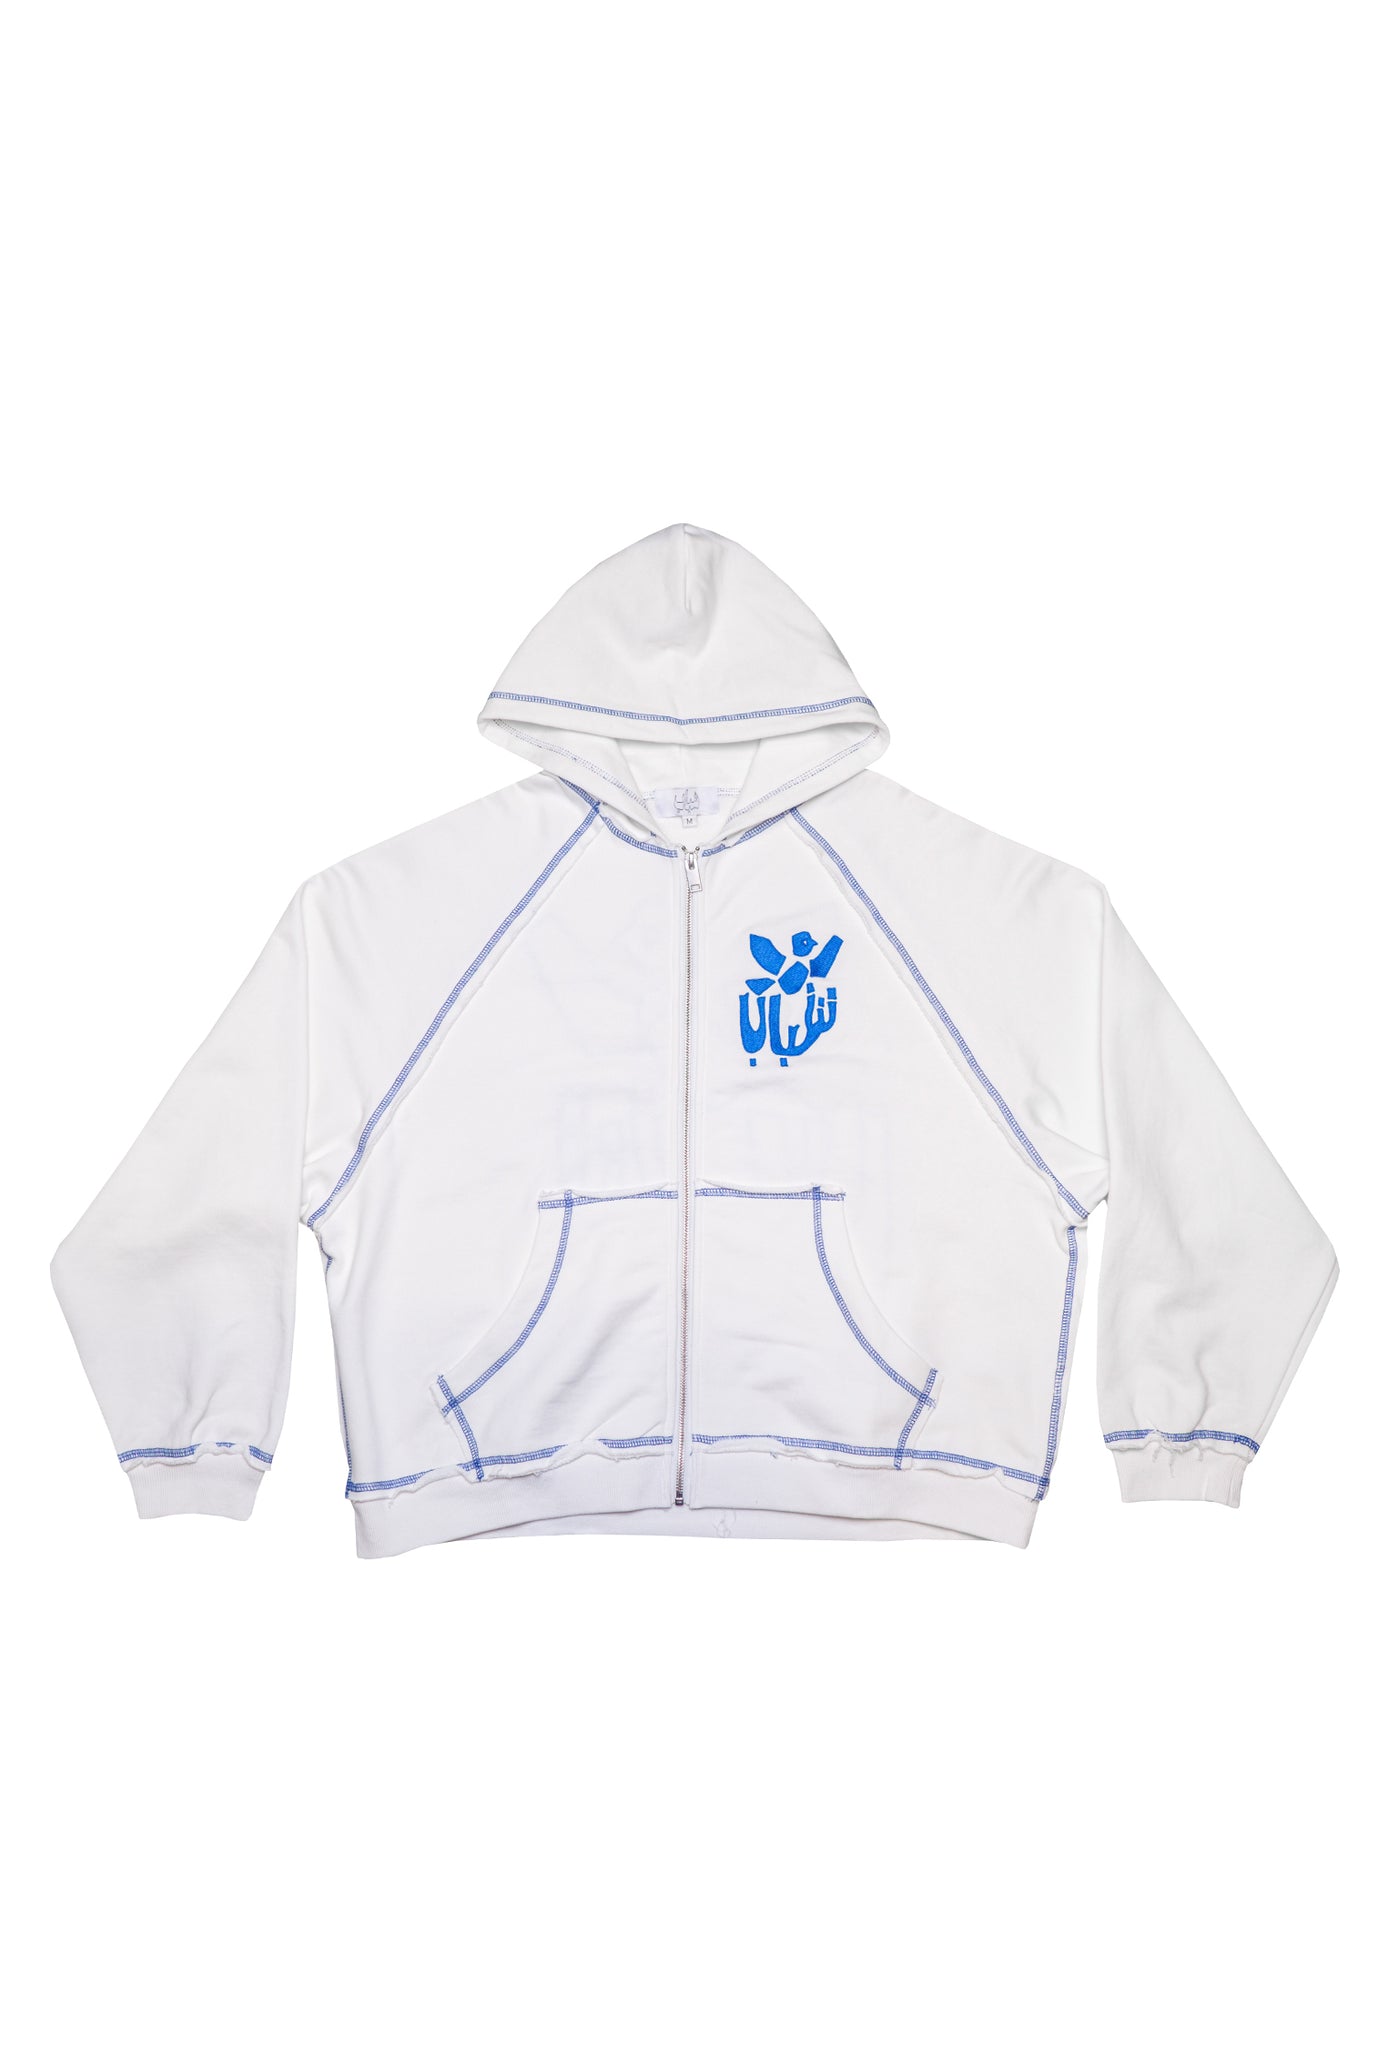 .FLY TO PARADISE ZIPPER HOODIE